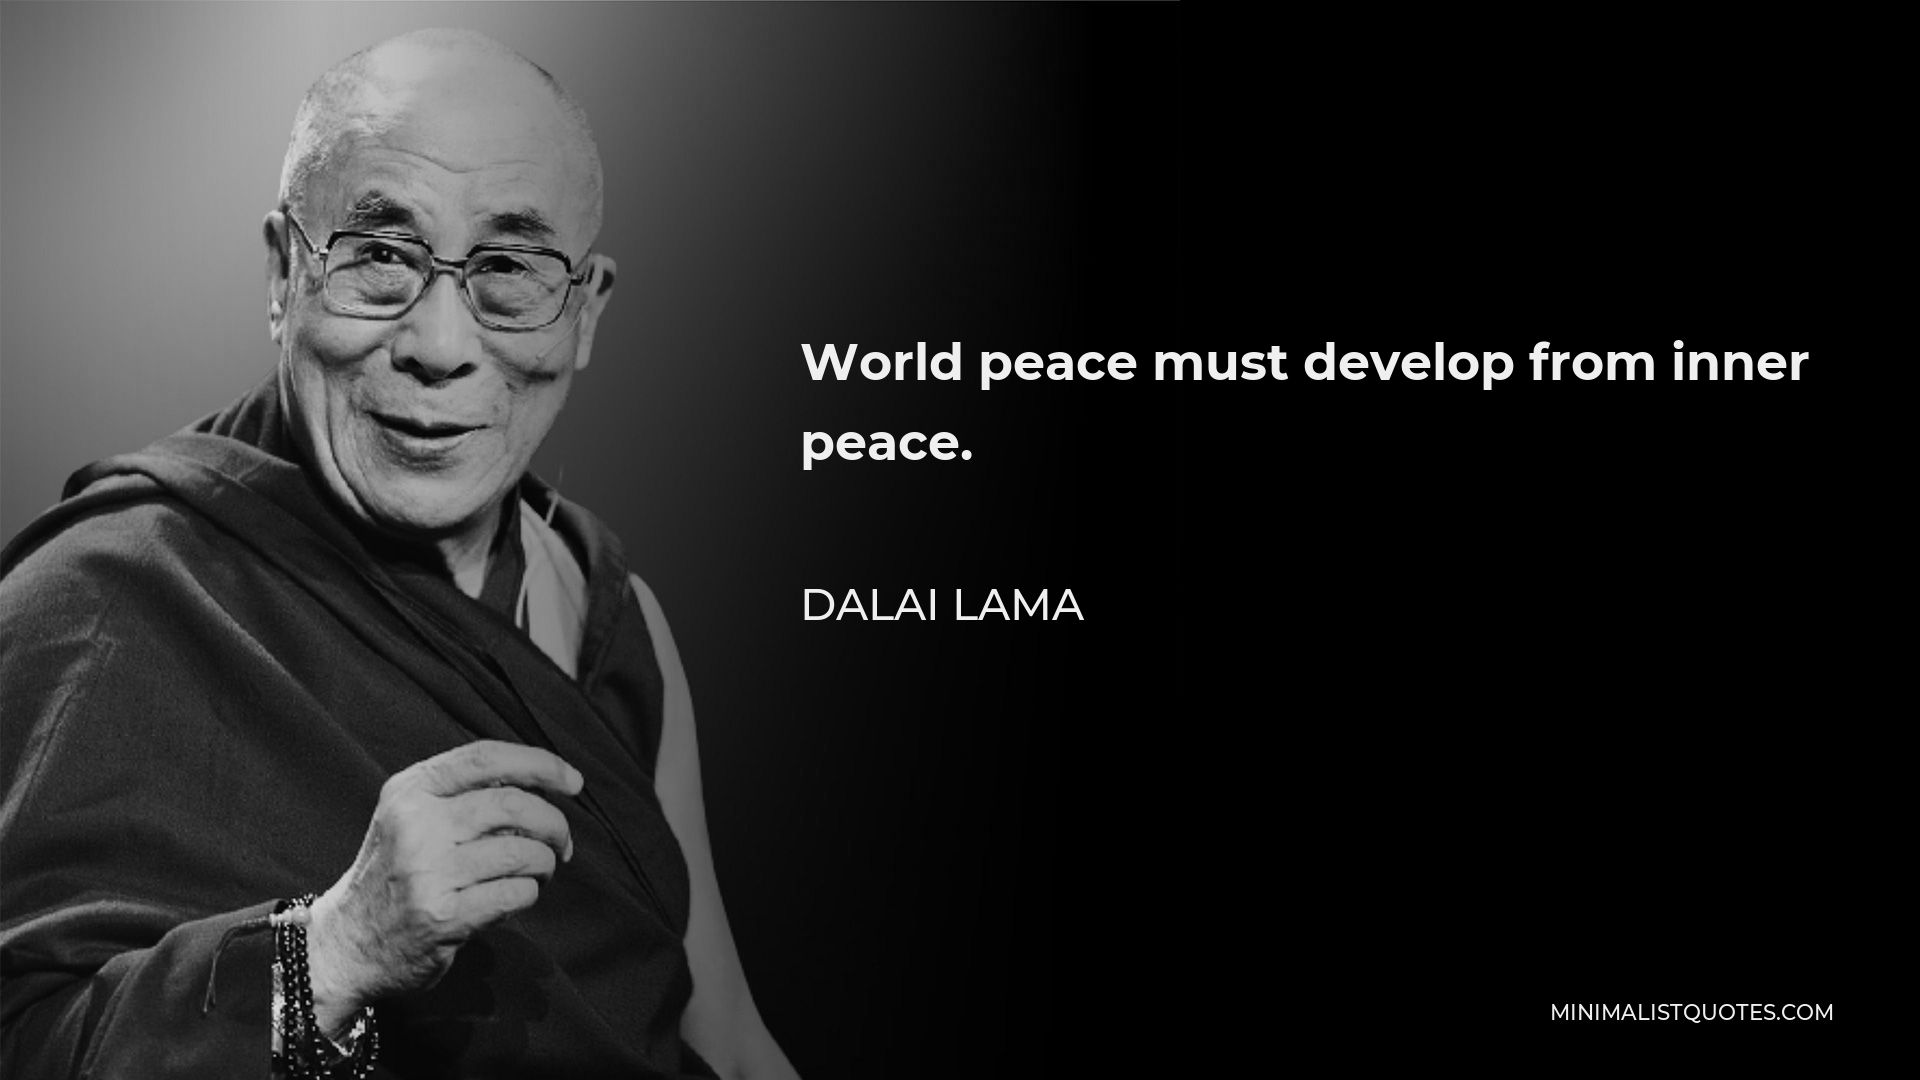 Dalai Lama Quote - World peace must develop from inner peace.